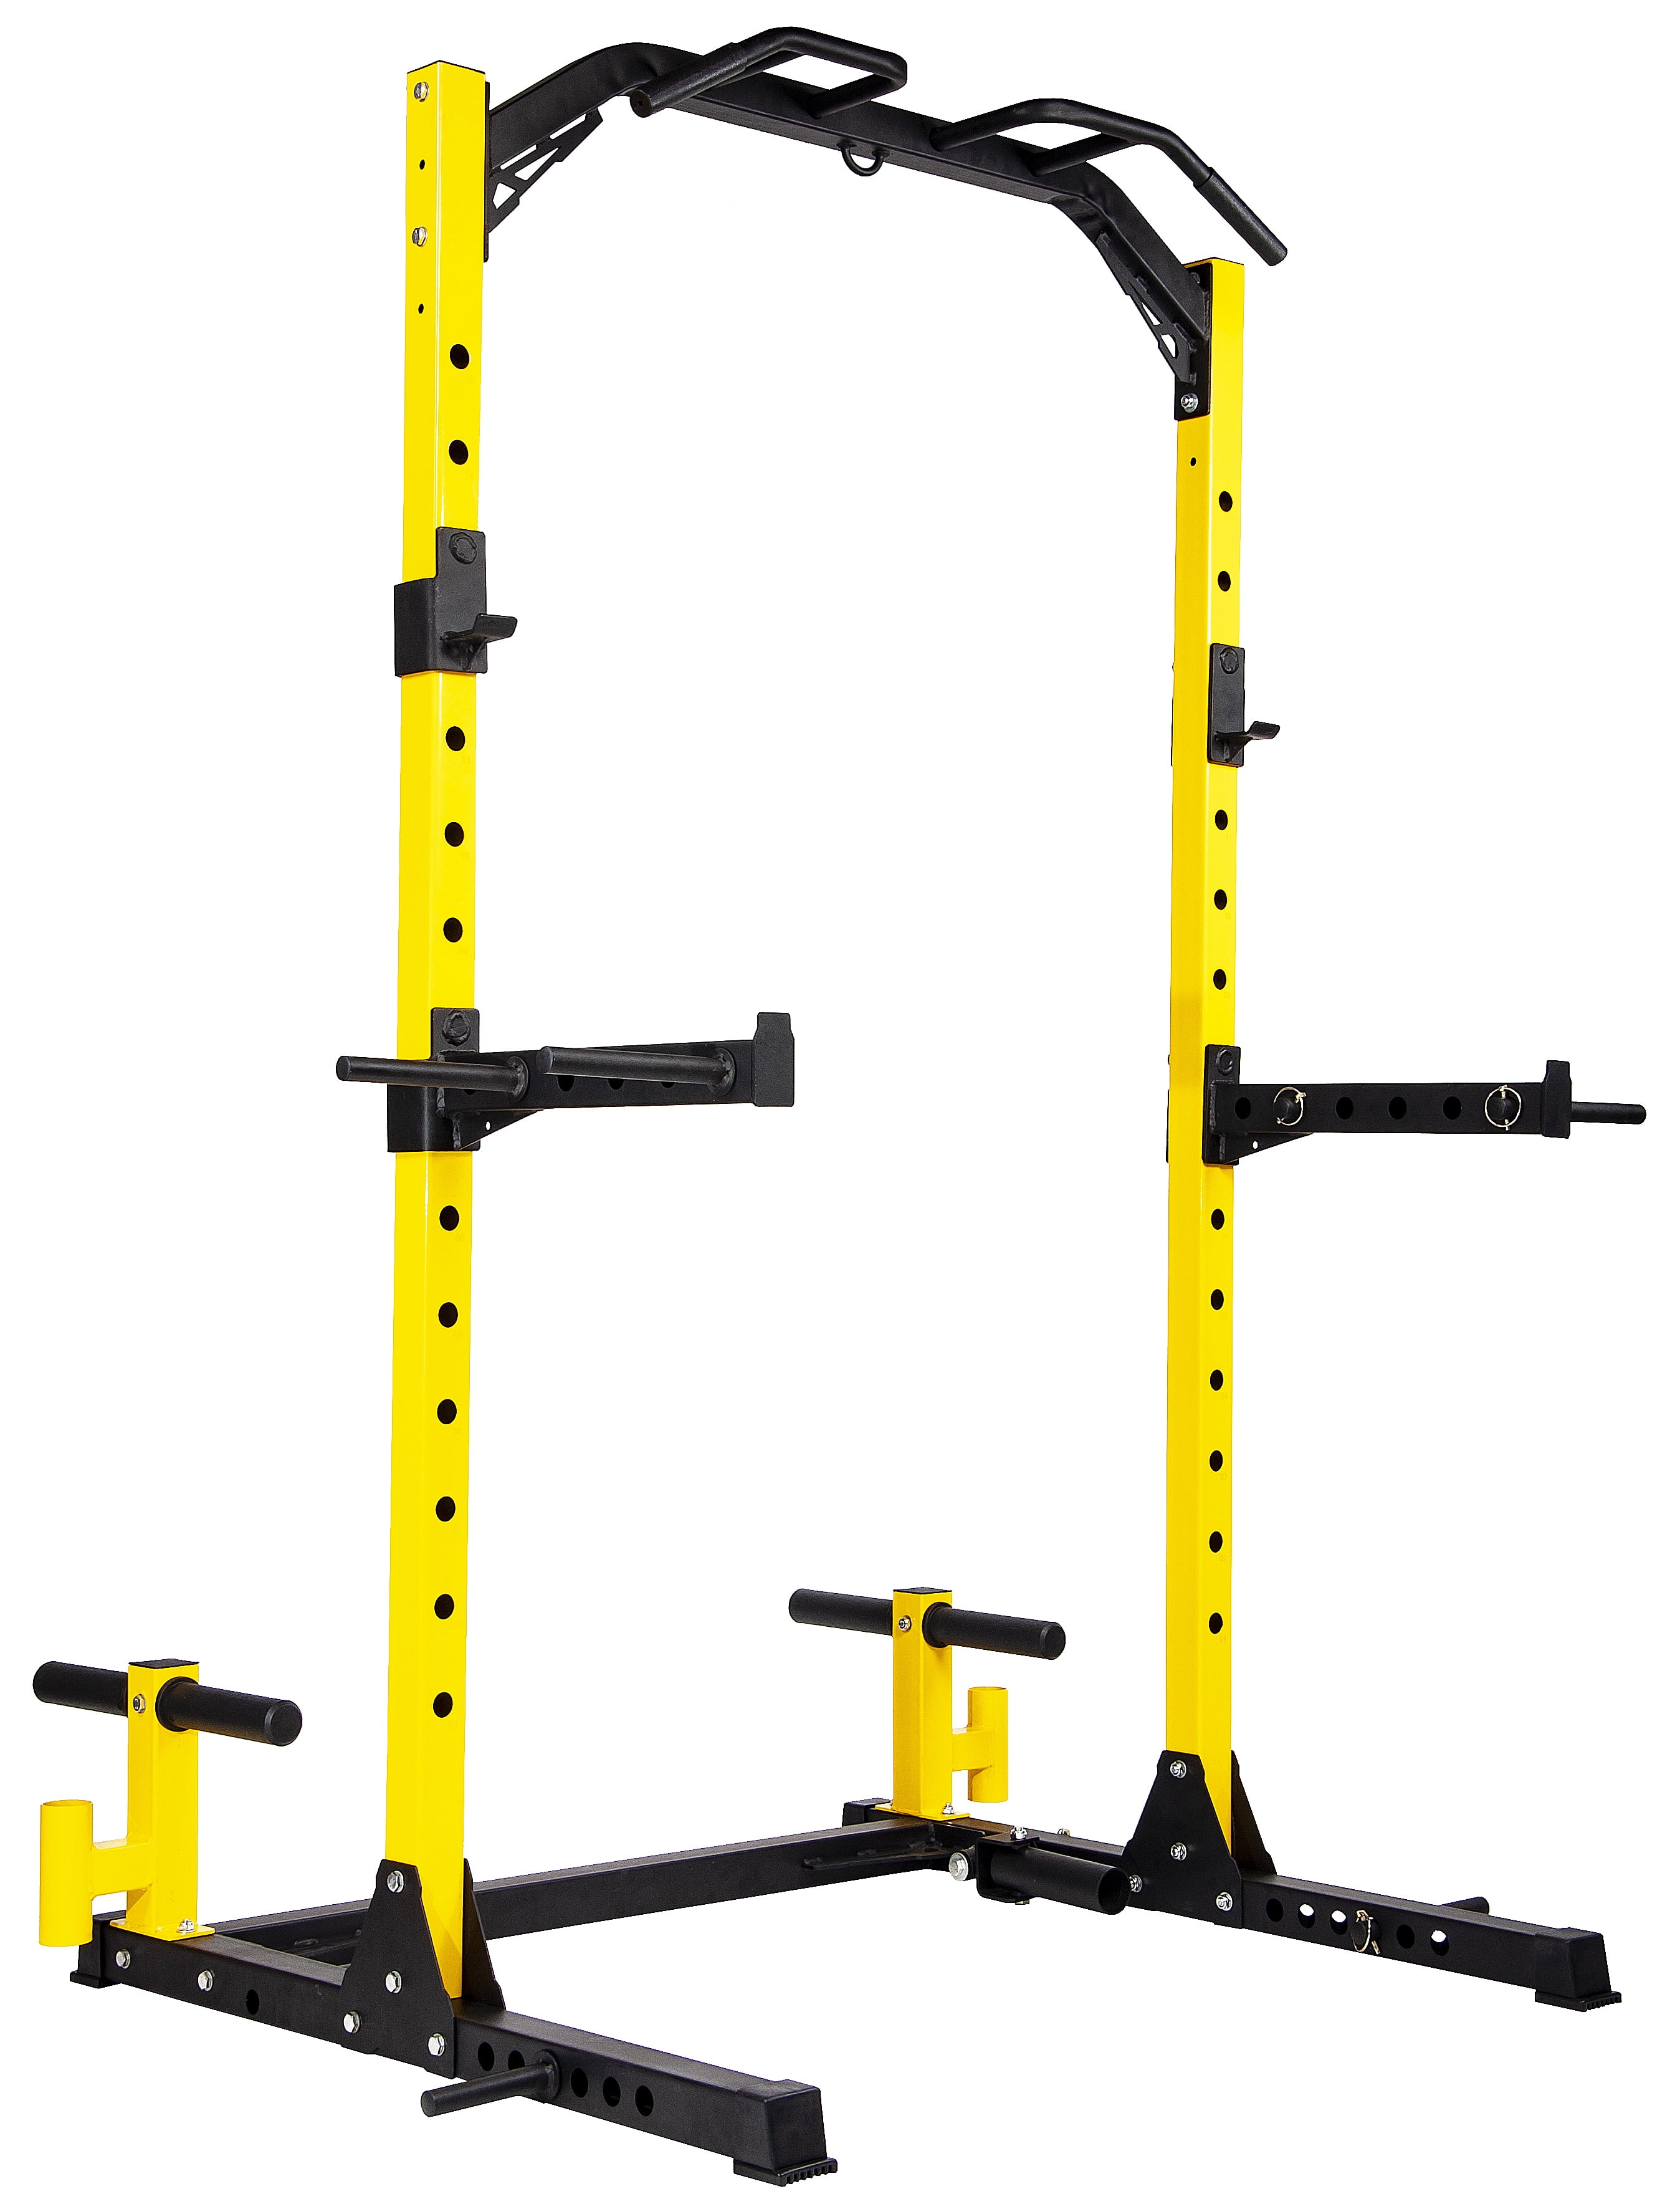 BalanceFrom 1000-Pound Capacity Multi-Function Adjustable Power Rack Squat Stand with Spotter Arms, Dip Bars, Weight Plate Holders, Barbell Holders and Landmine Attachment - Walmart.com